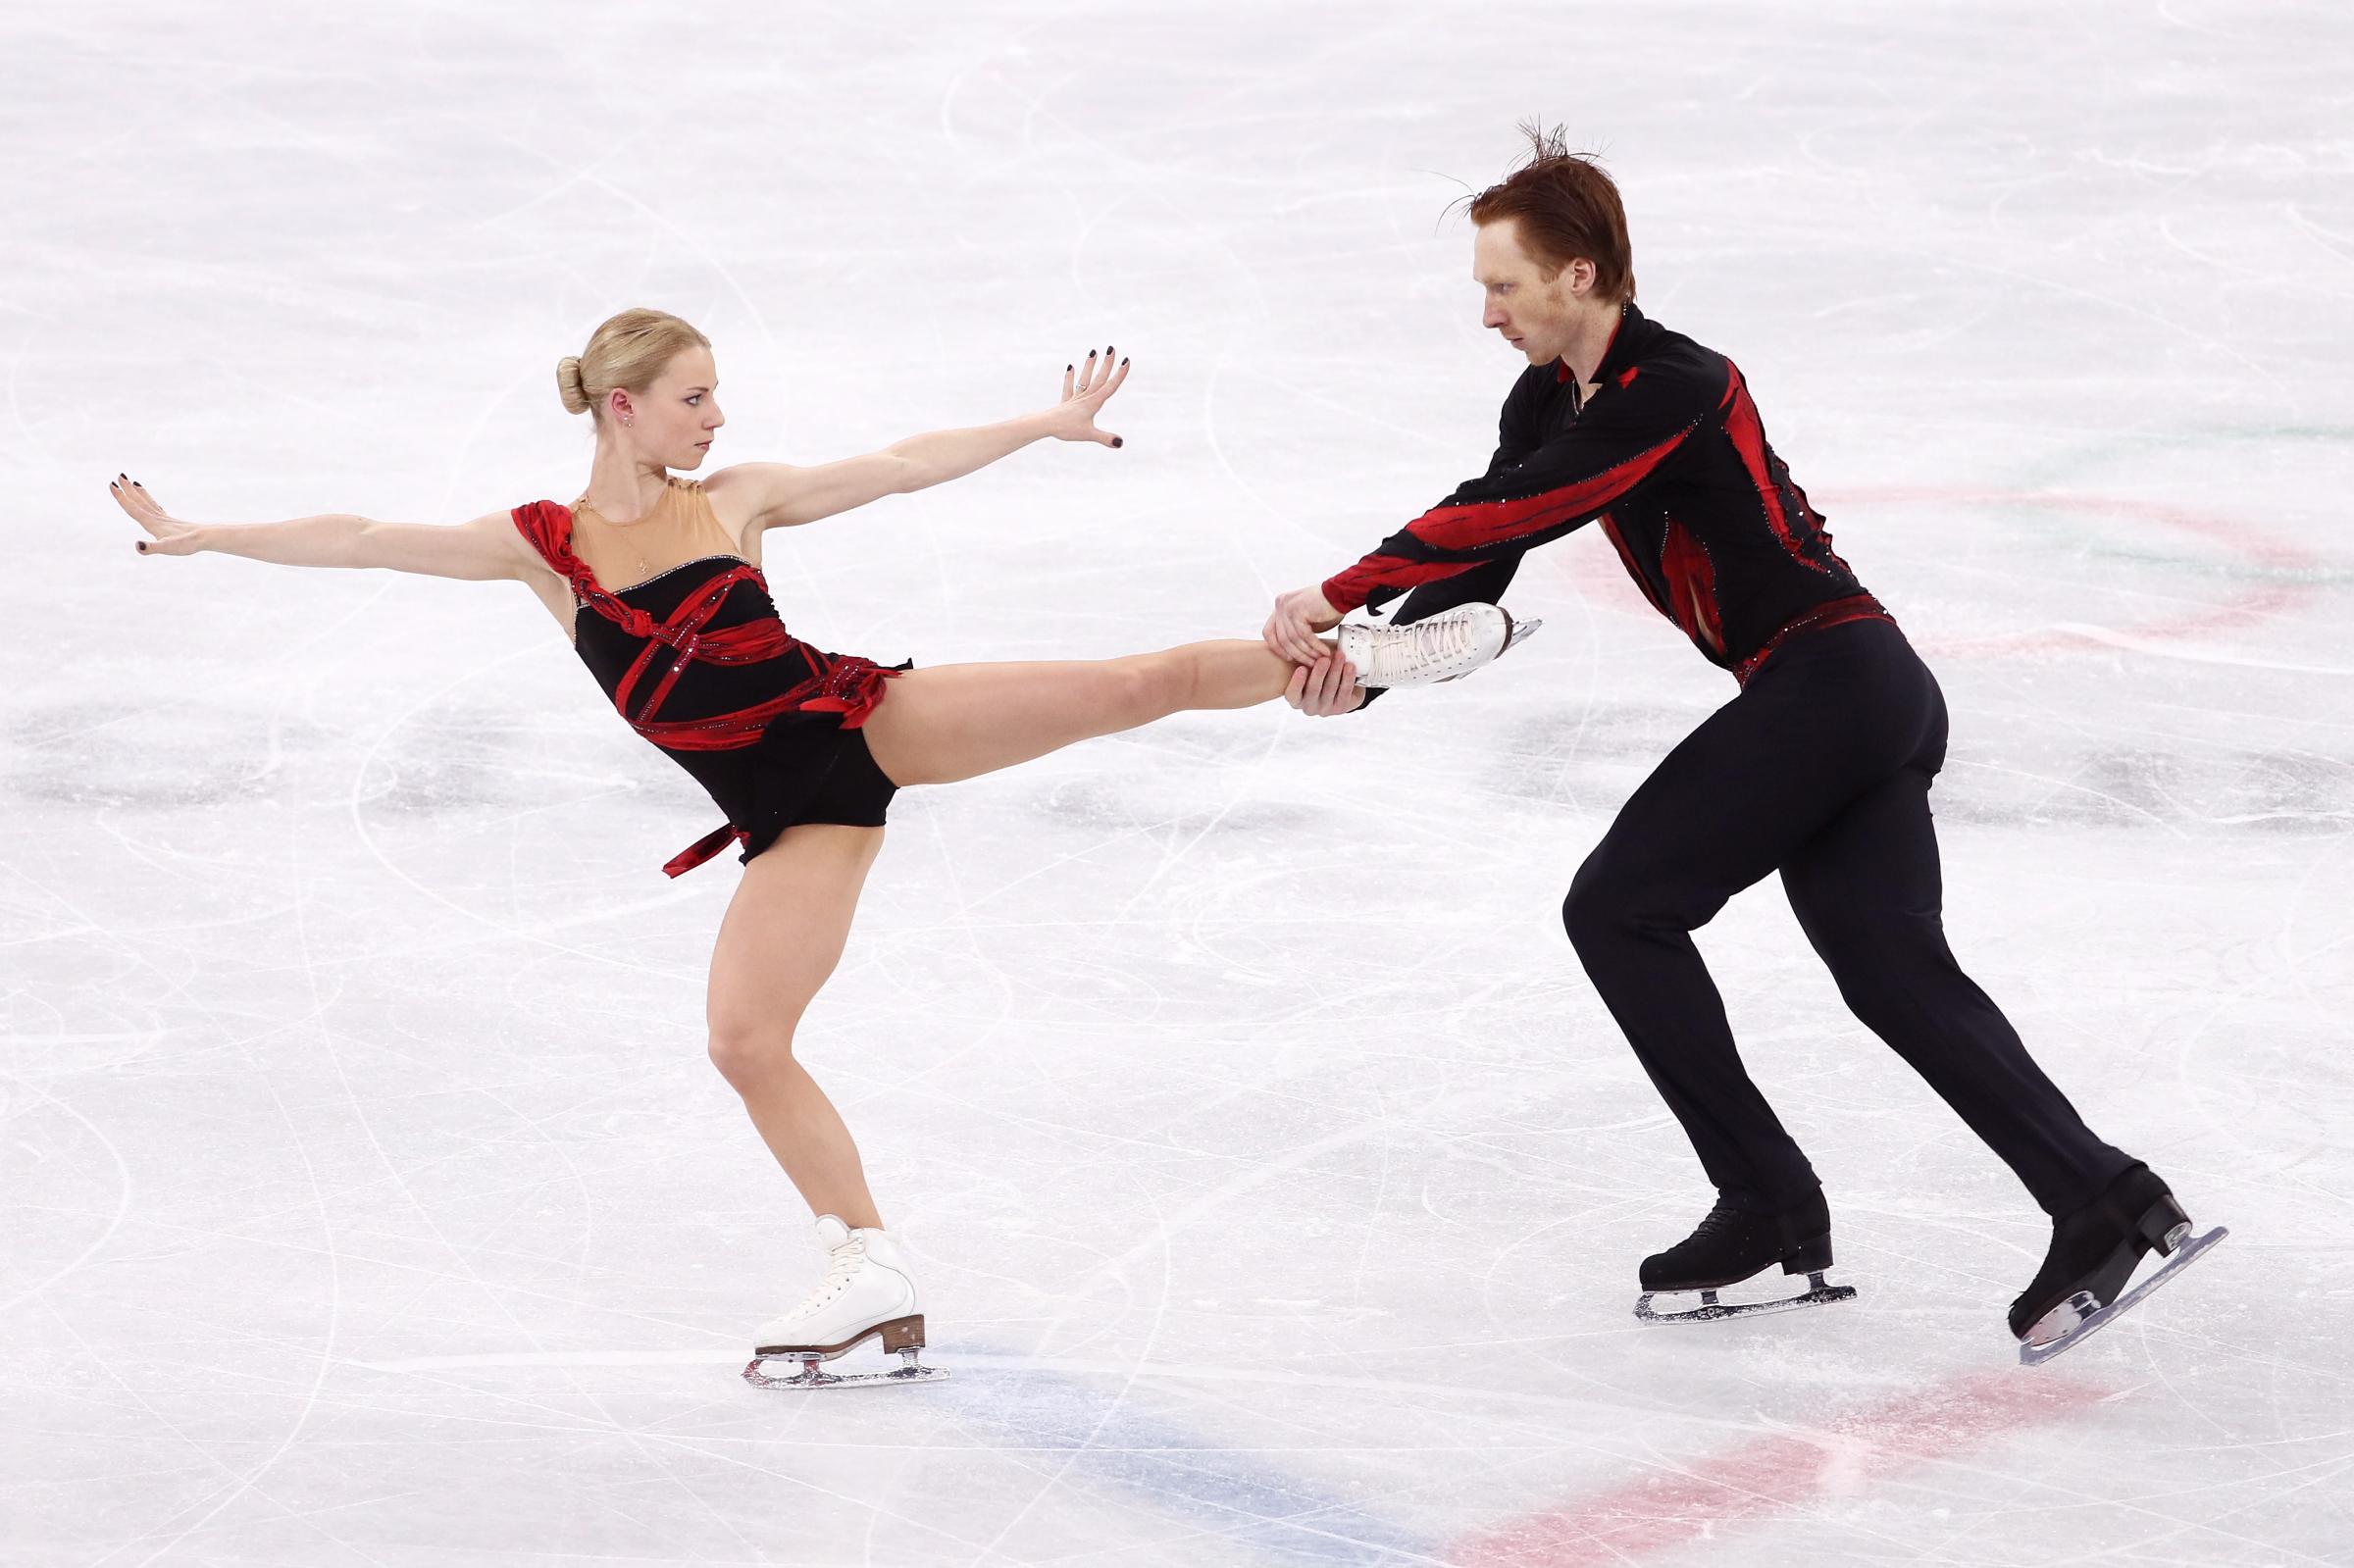 Olympic Athletes from Russia Evgenia Tarasova and Vladimir Morozov compete during the Pair Skating Short Program on day five of the PyeongChang 2018 Winter Olympics on Feb. 14, 2018.